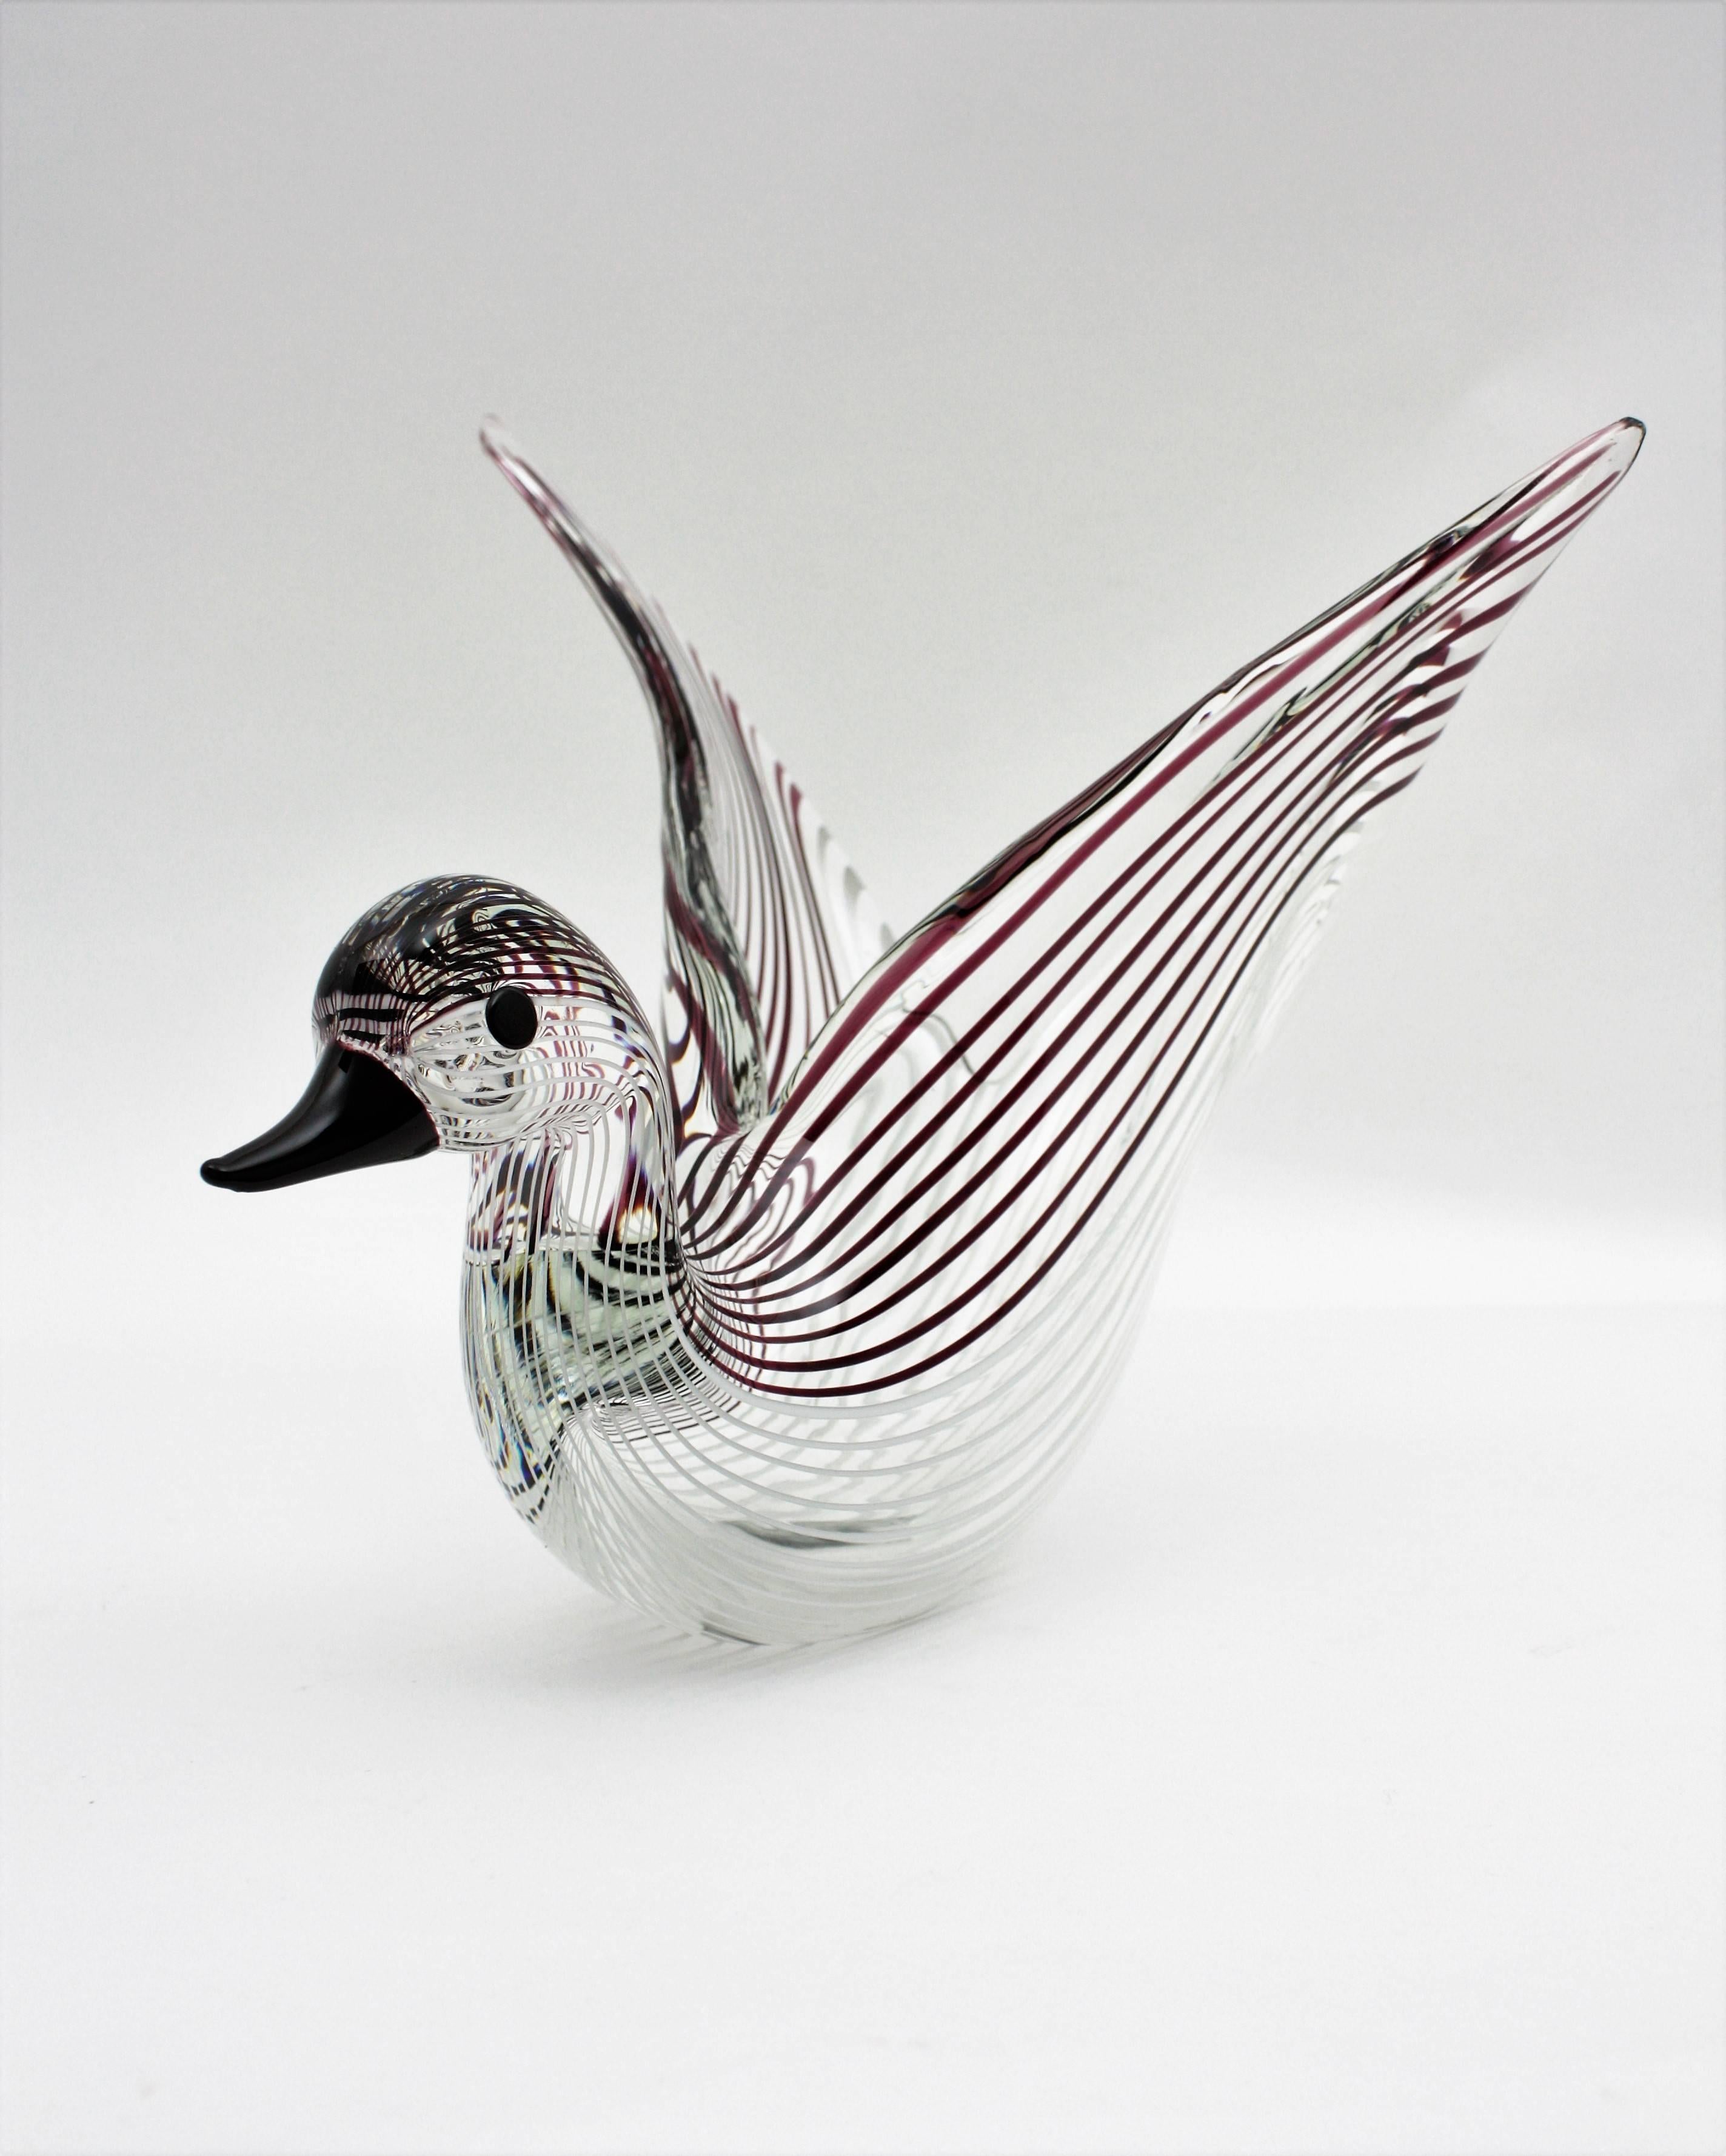 Elegant Murano glass duck figure / sculpture with ribbons in white and burgundy colors by Licio Zanetti. Italy, 1960-1970.
This exquisite large sized Murano glass centerpiece features a hand blown clear glass duck figure with open wings with